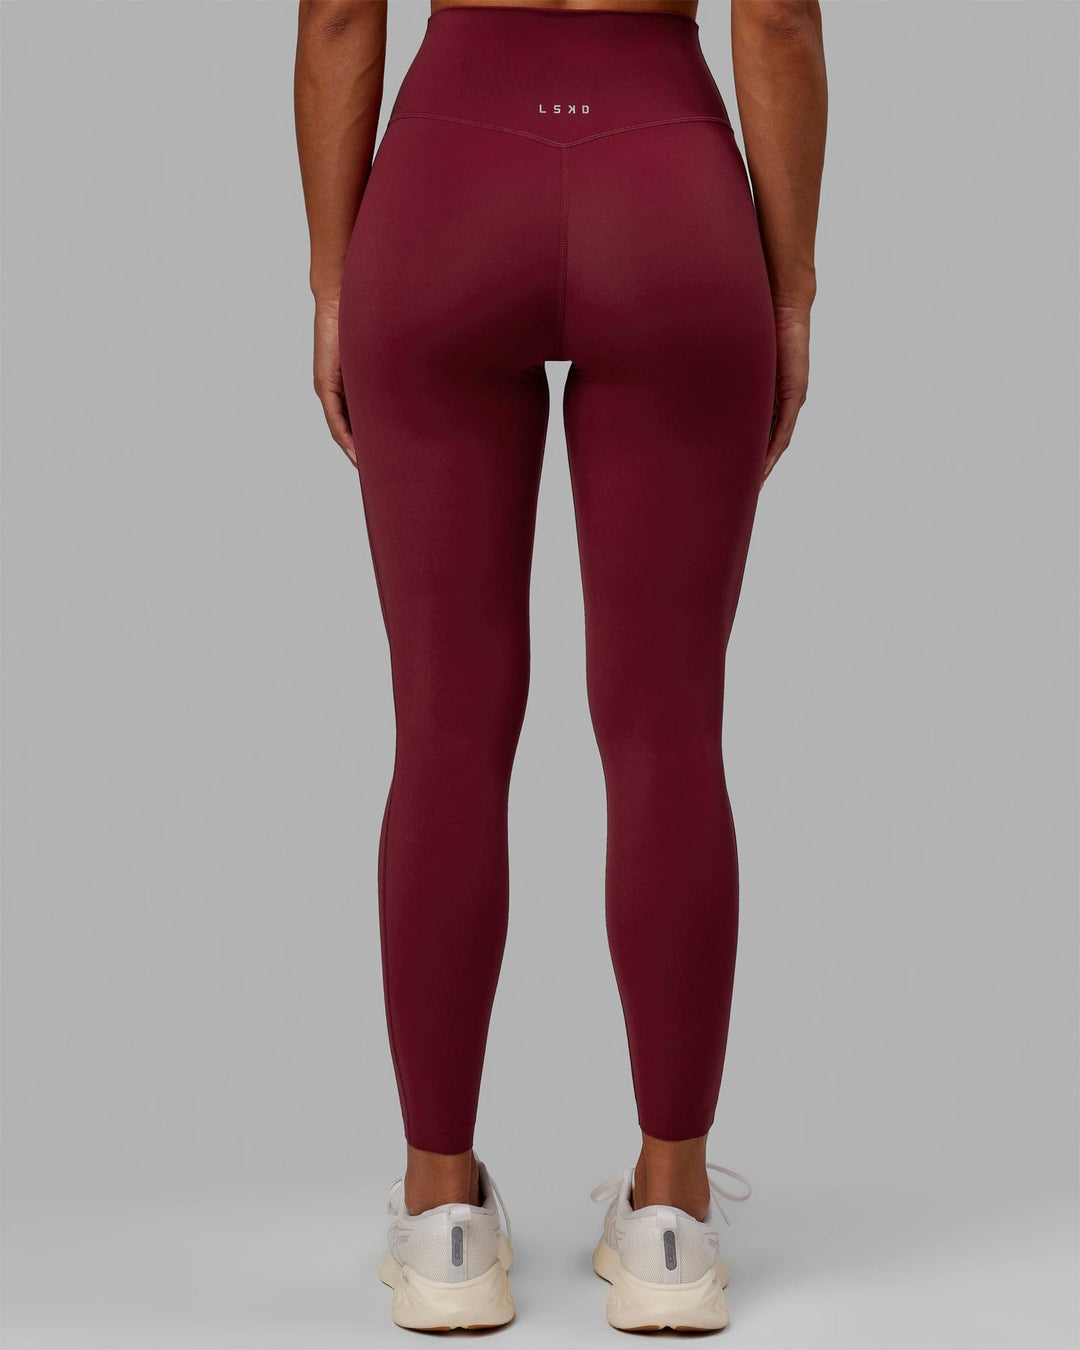 Woman wearing Elixir Full Length Tights - Cranberry